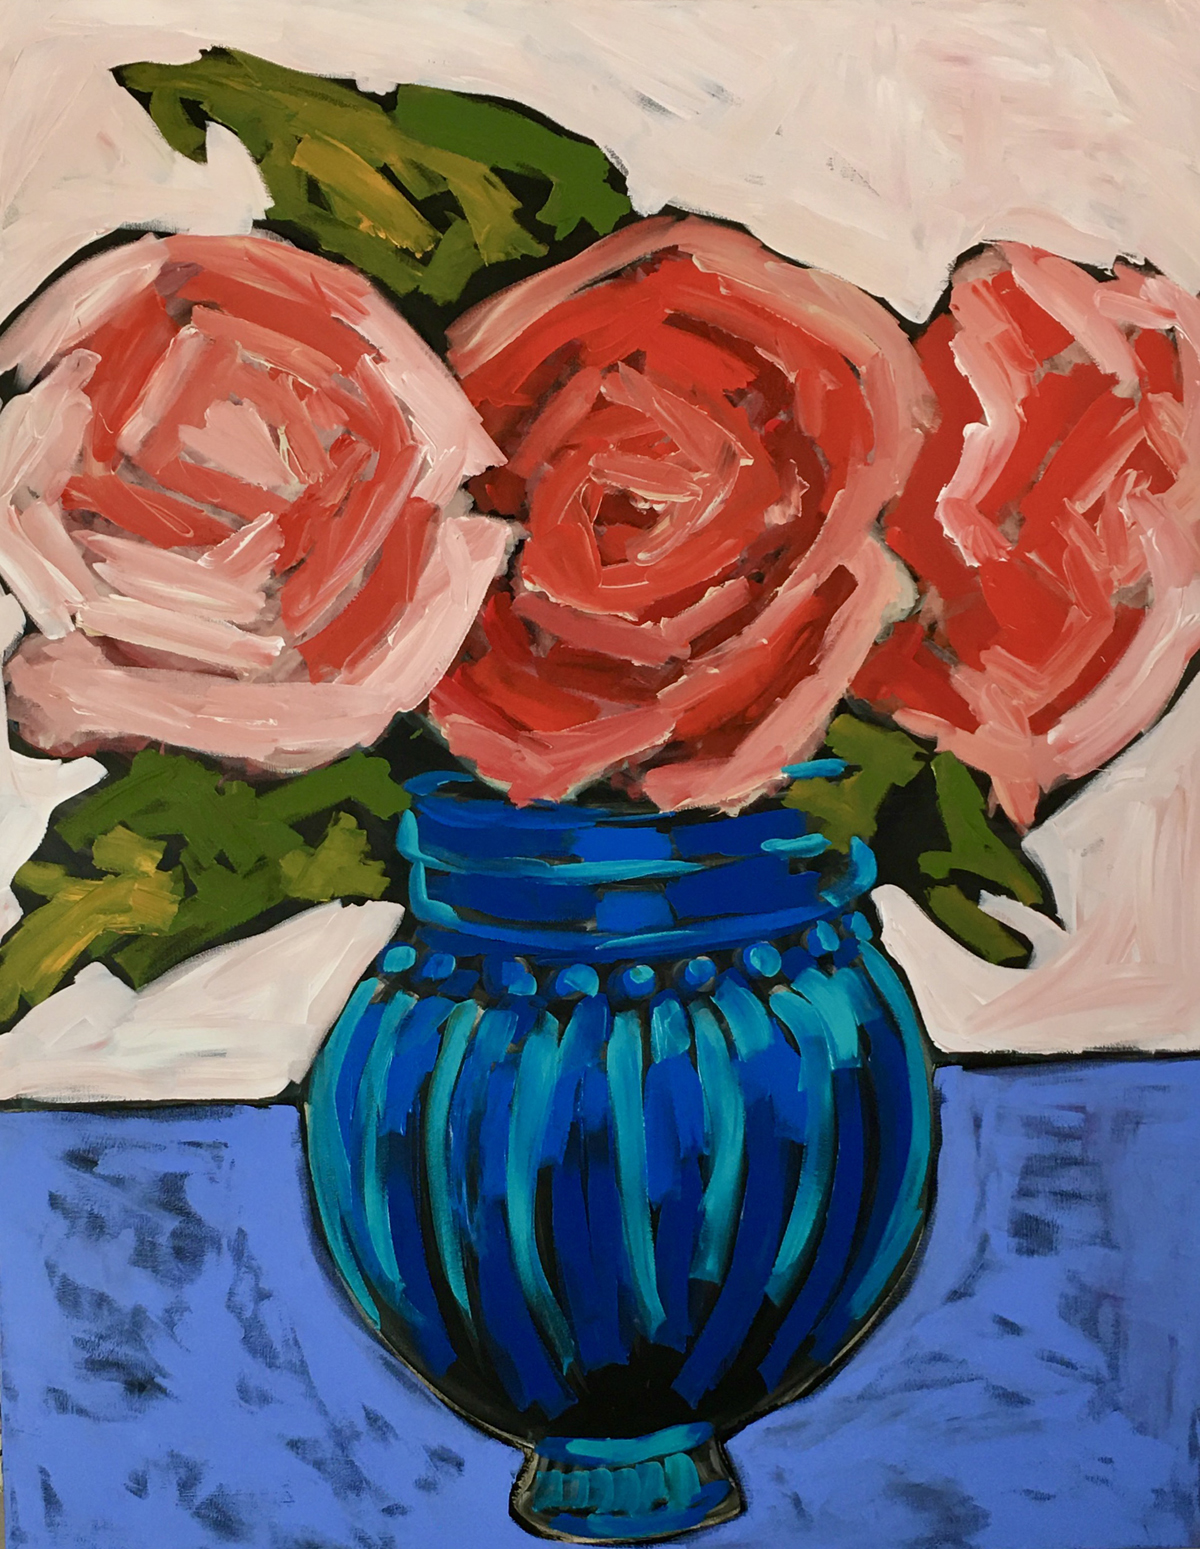 Roses in Blue